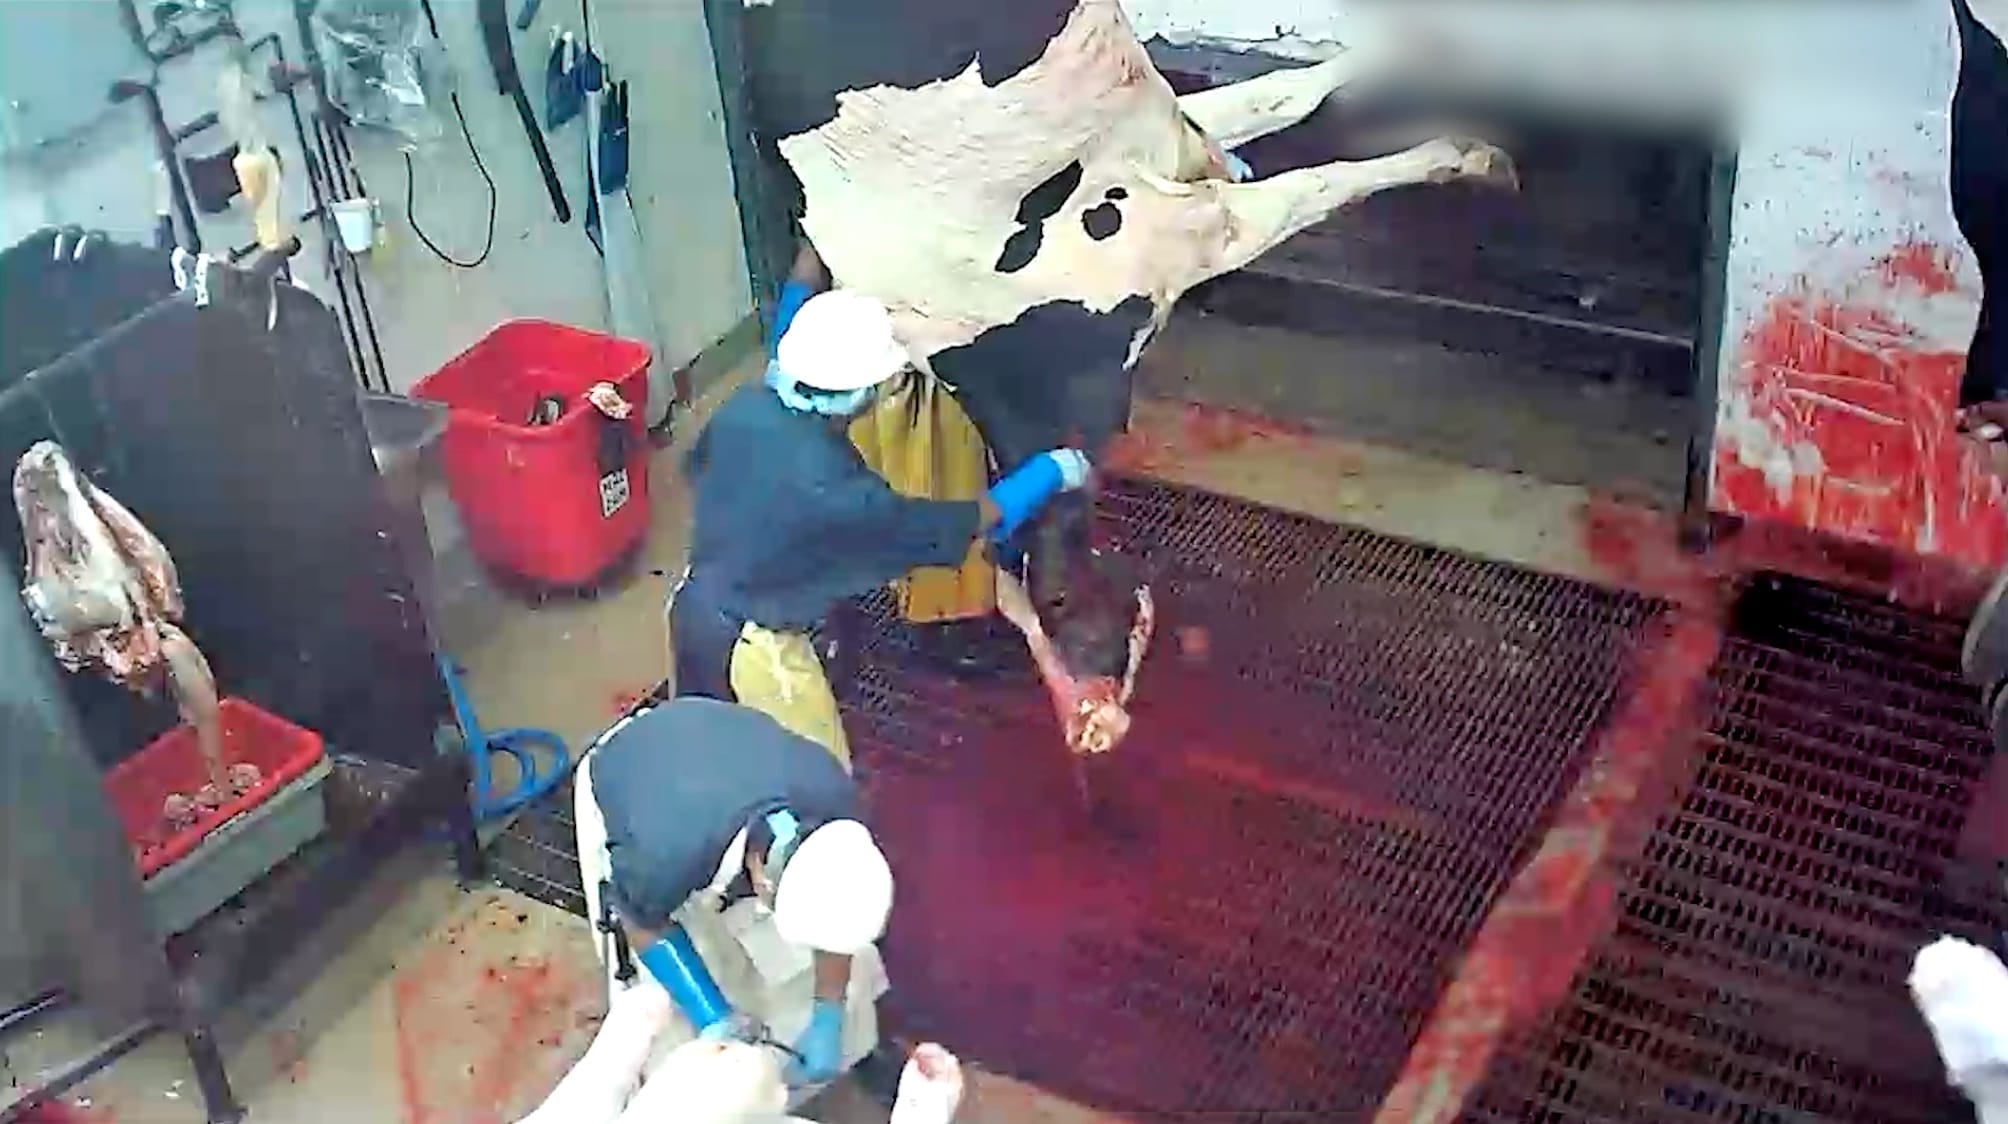 Image shows cow on kill floor in slaughterhouse.